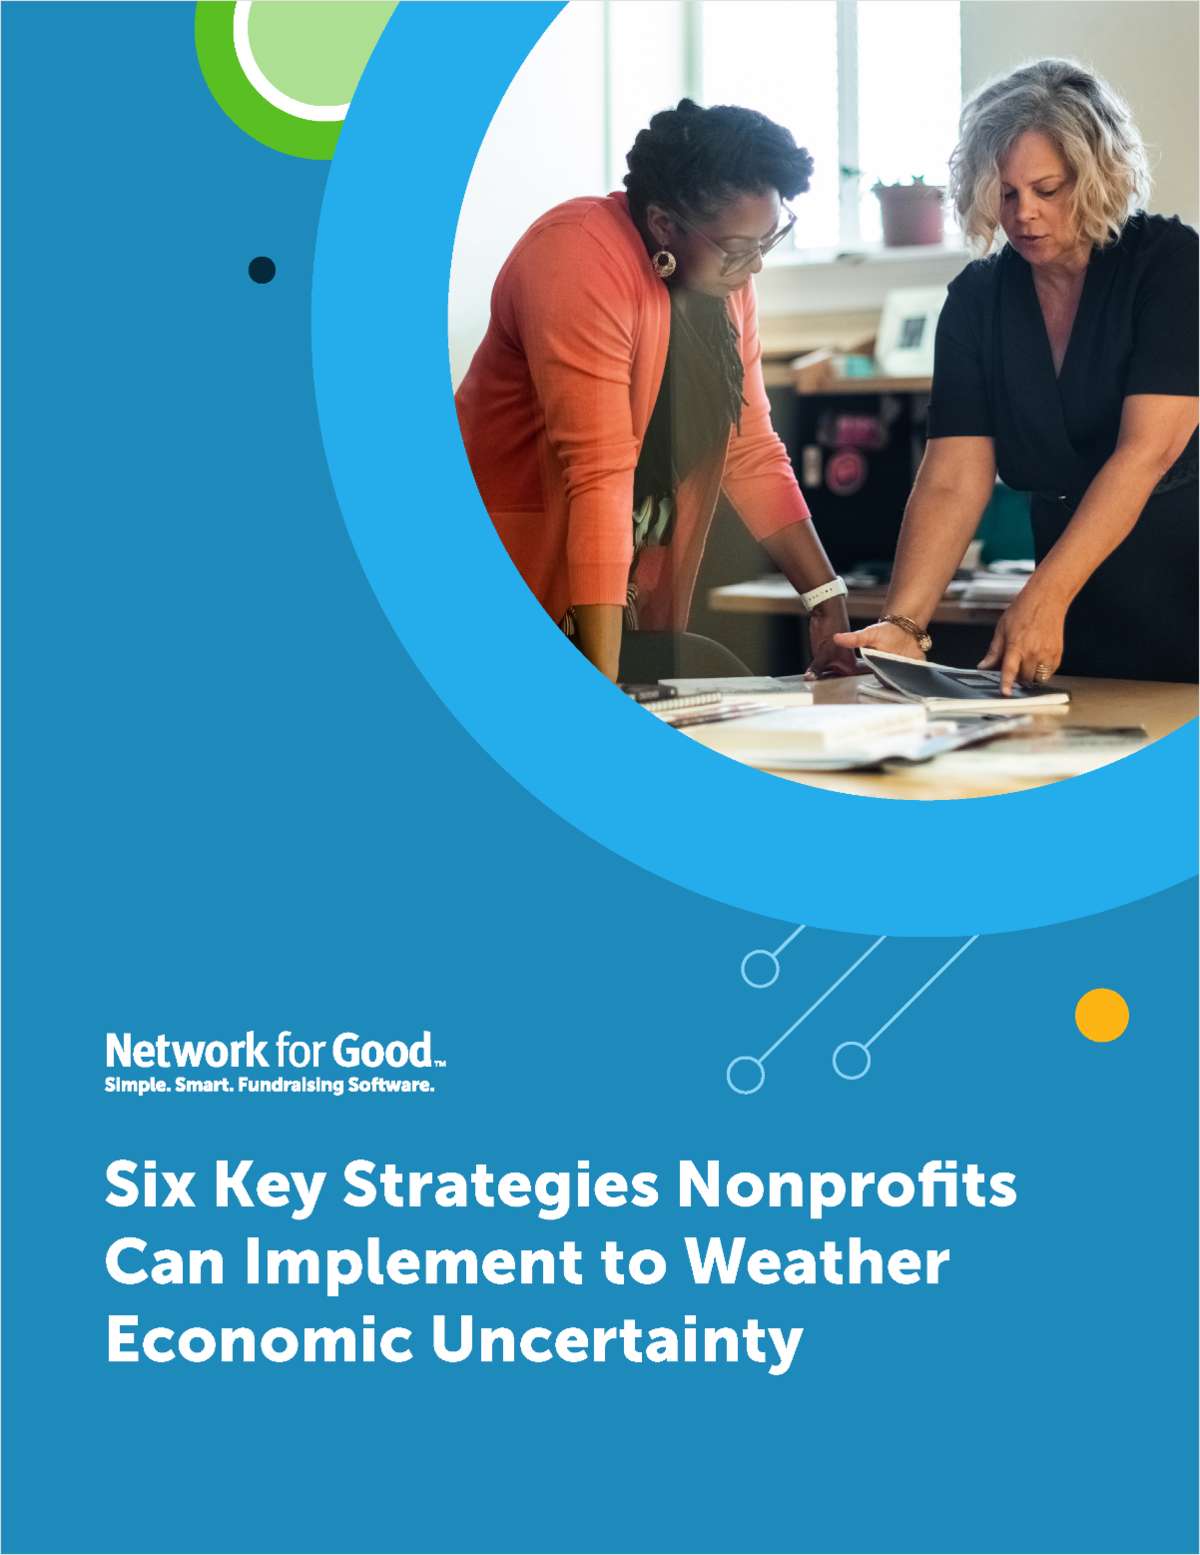 Six Key Strategies Nonprofits Can Implement to Weather Economic Uncertainty